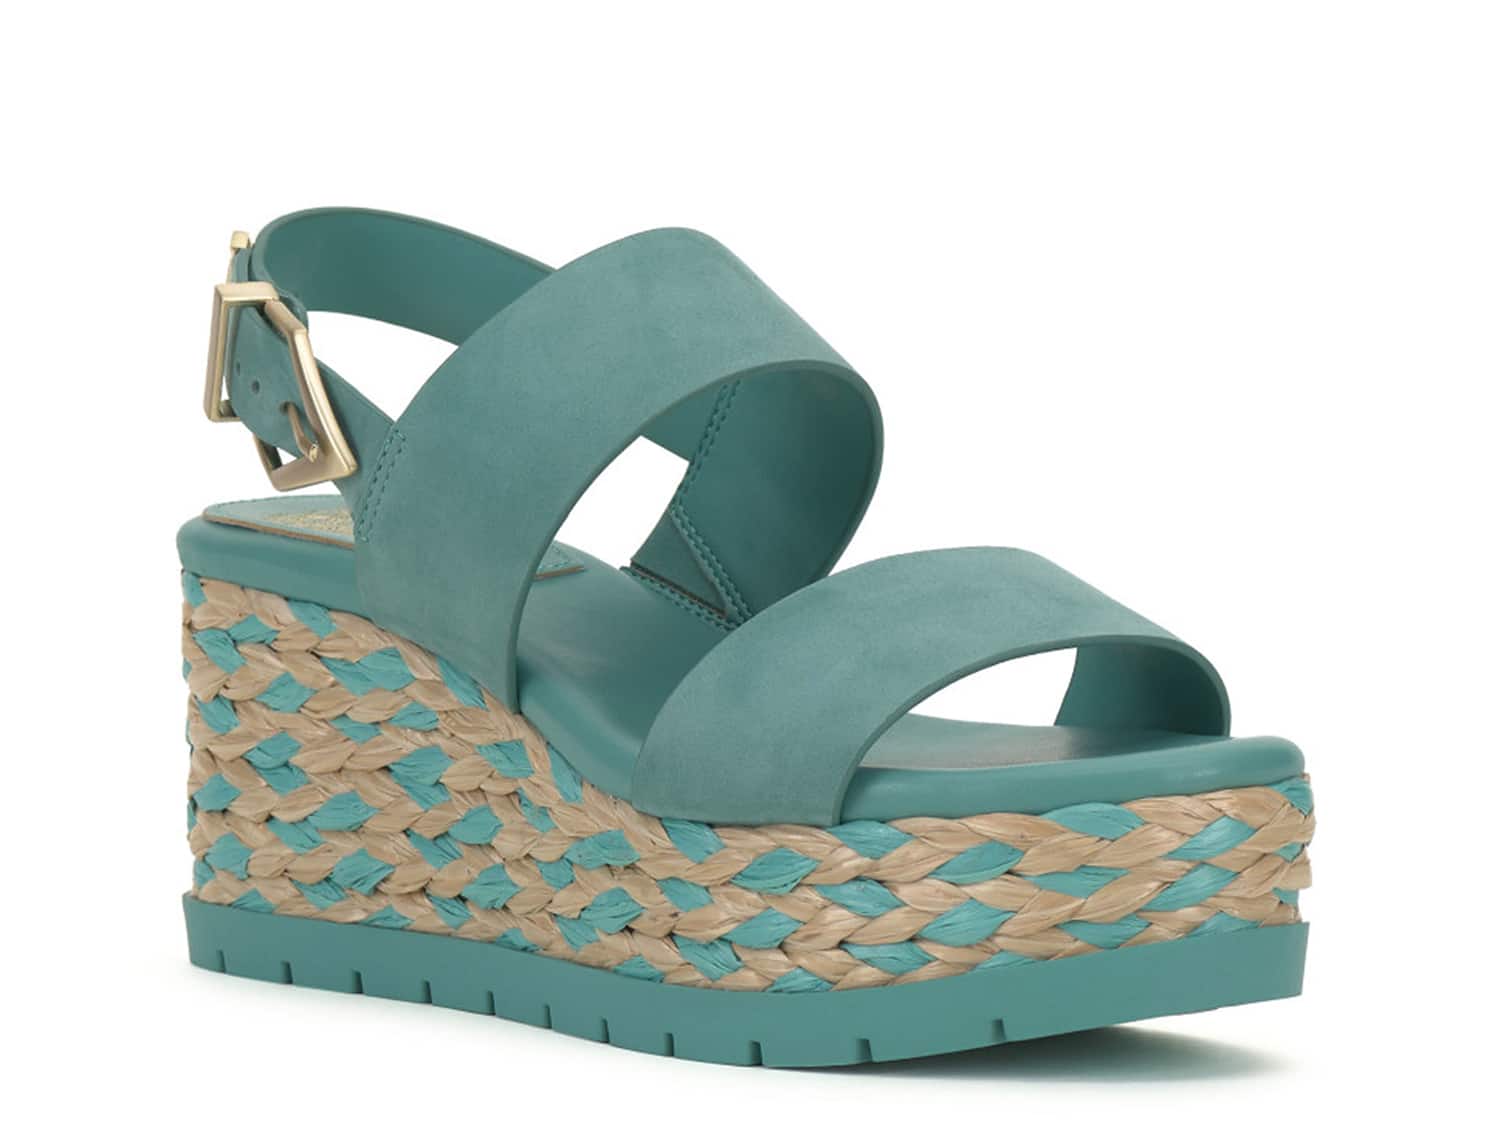 Vince Camuto Miapelle Espadrille Wedge Sandal - Free Shipping | DSW